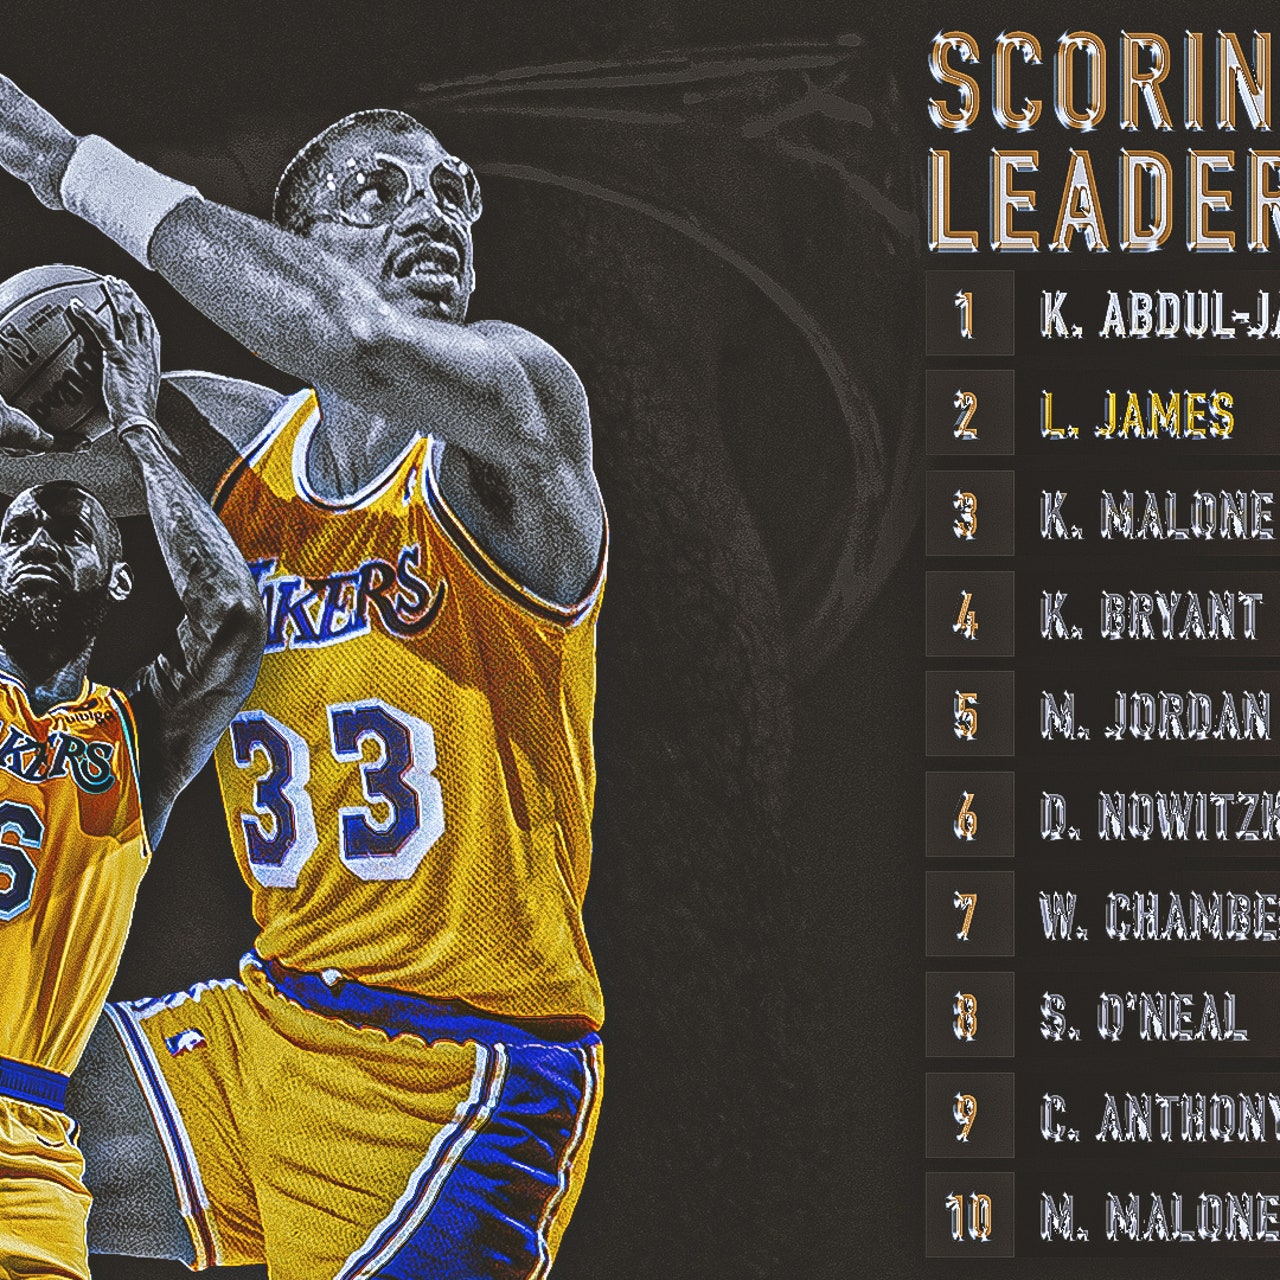 The Most Career Points By Position: Kareem Abdul-Jabbar And LeBron James  Lead The Highest-Scoring Lineup Of All Time - Fadeaway World